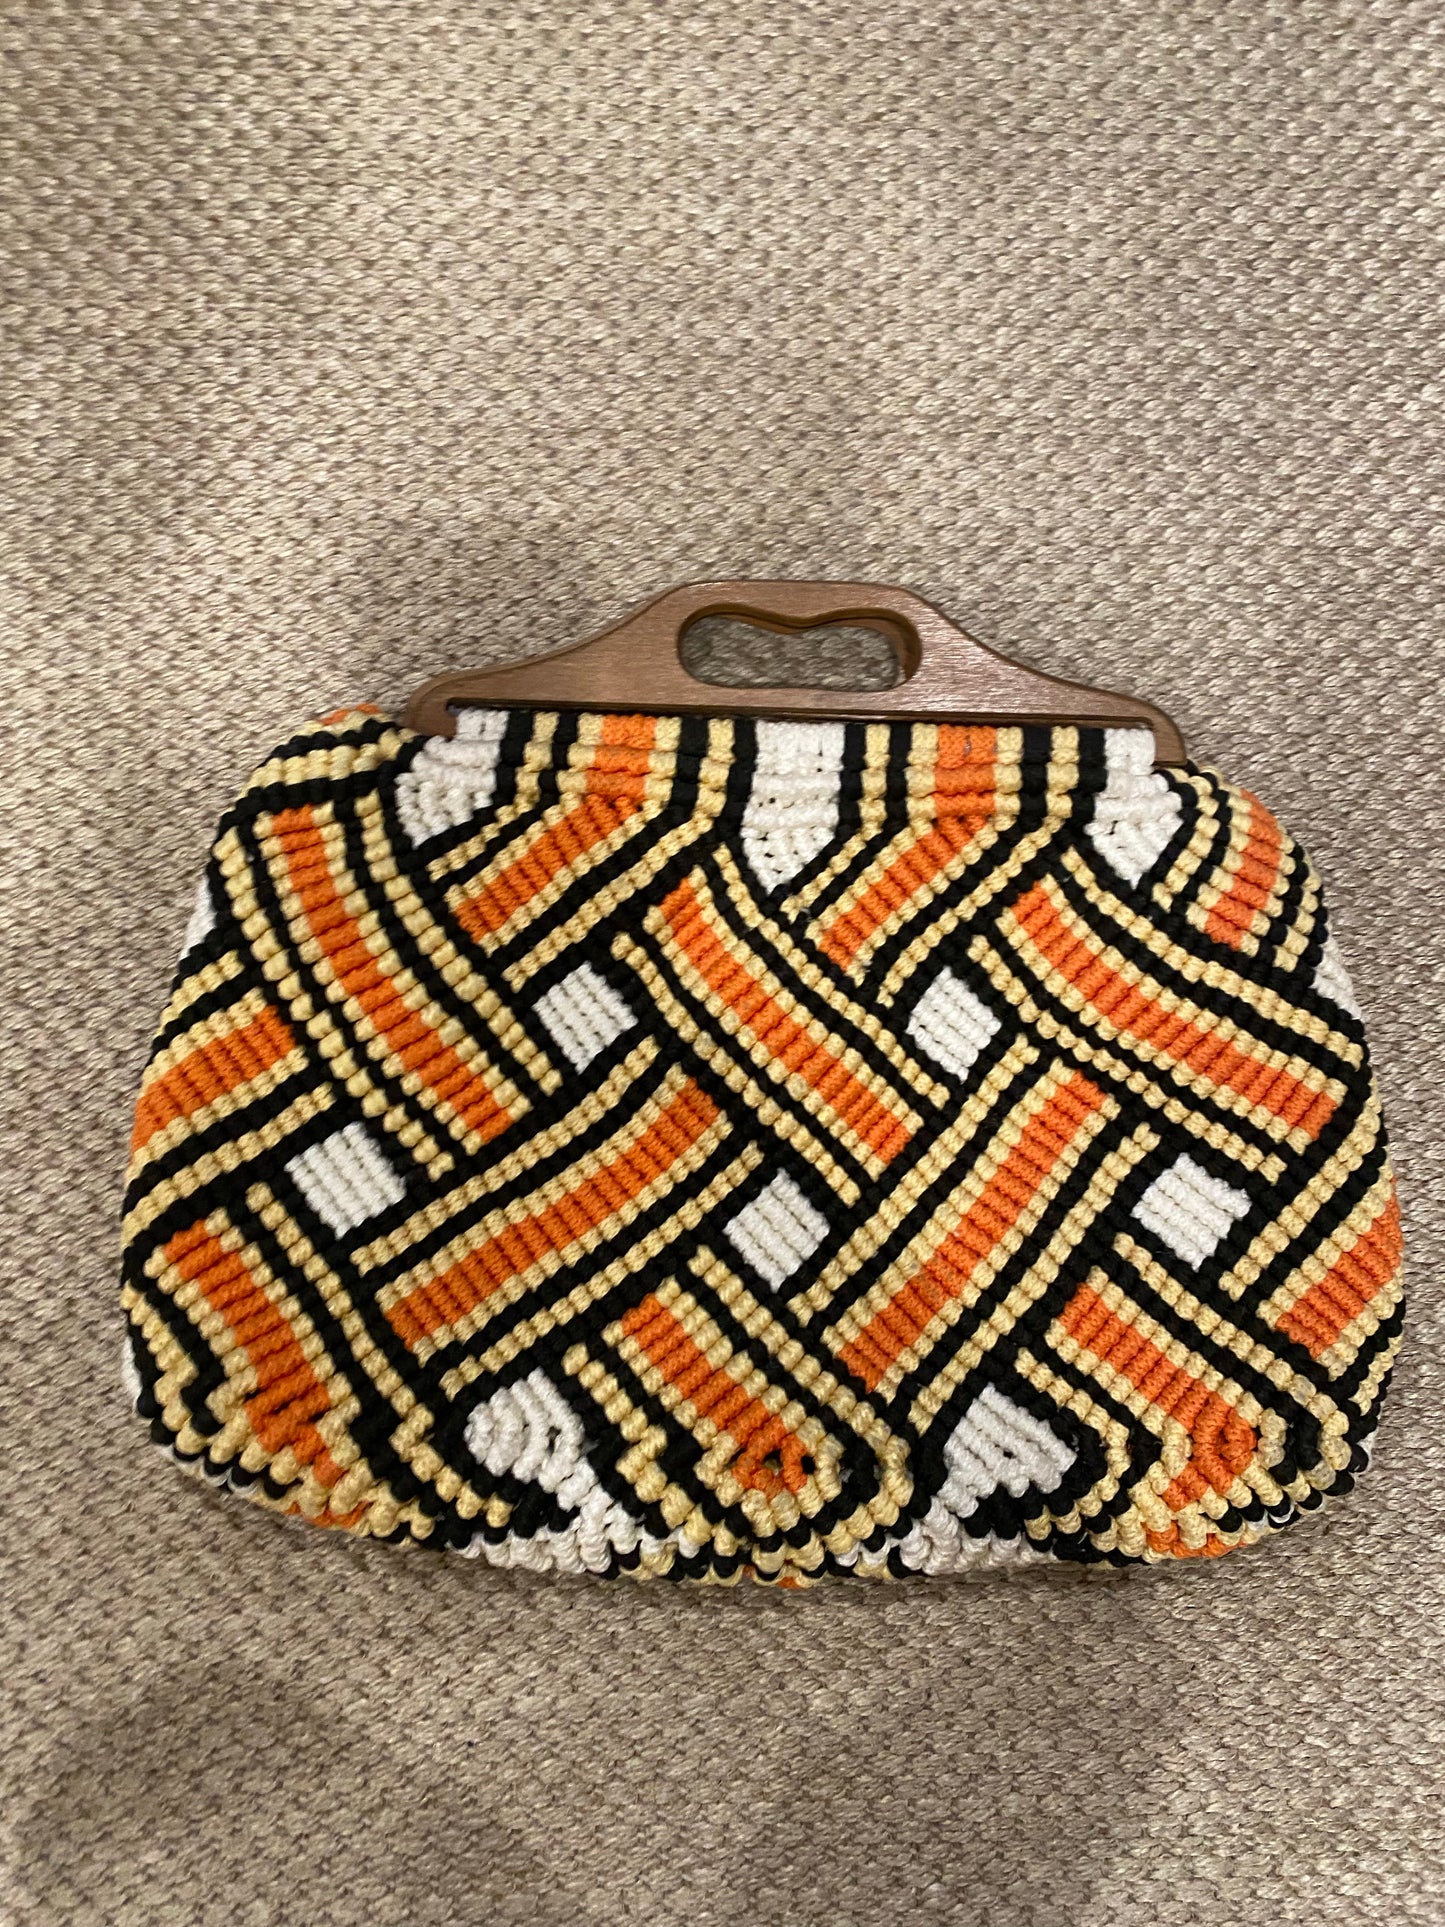 Woven Purse, Wooden Handle, 1960's